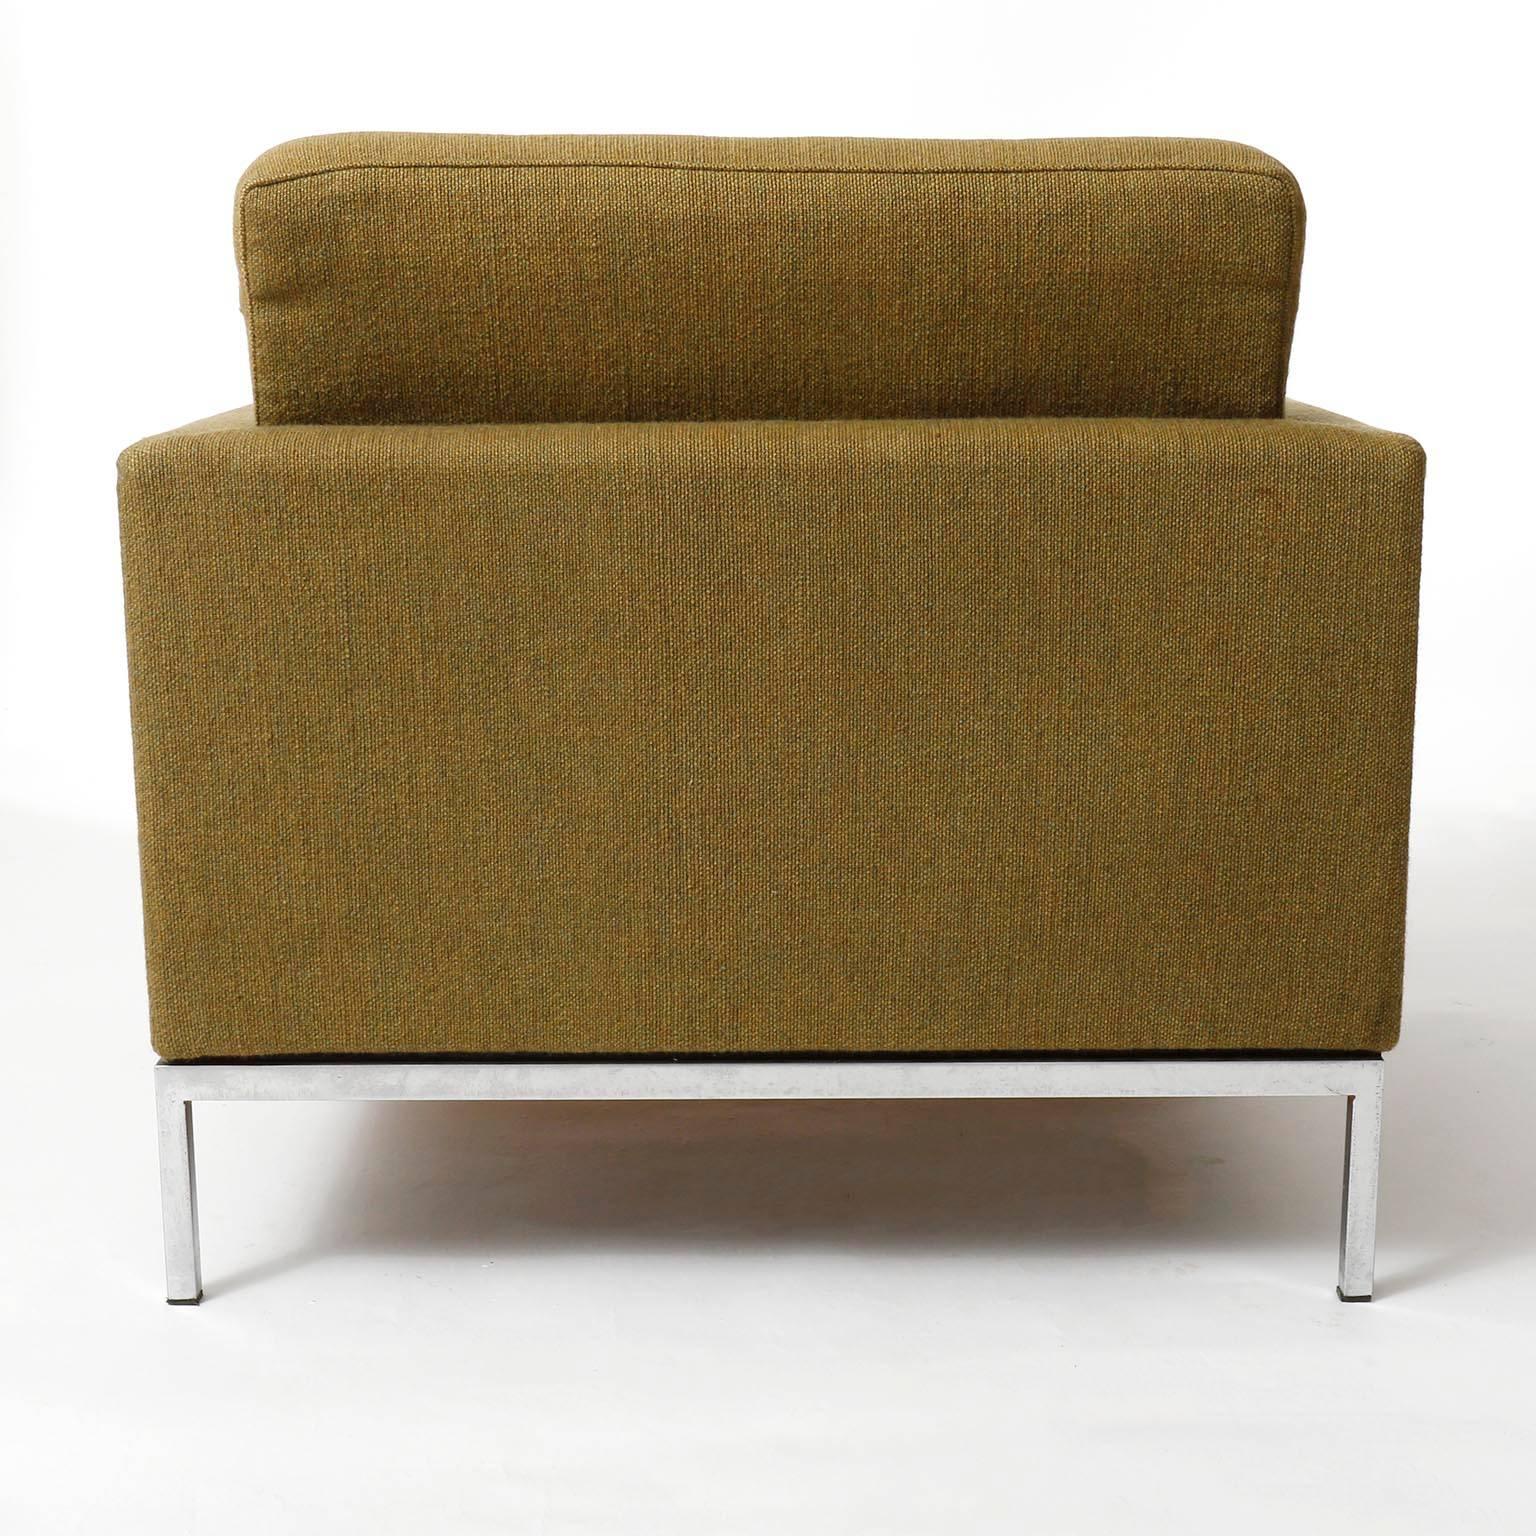 Late 20th Century Set of Six Green Florence Knoll Lounge Chairs 1205 S1, Knoll International, 1954